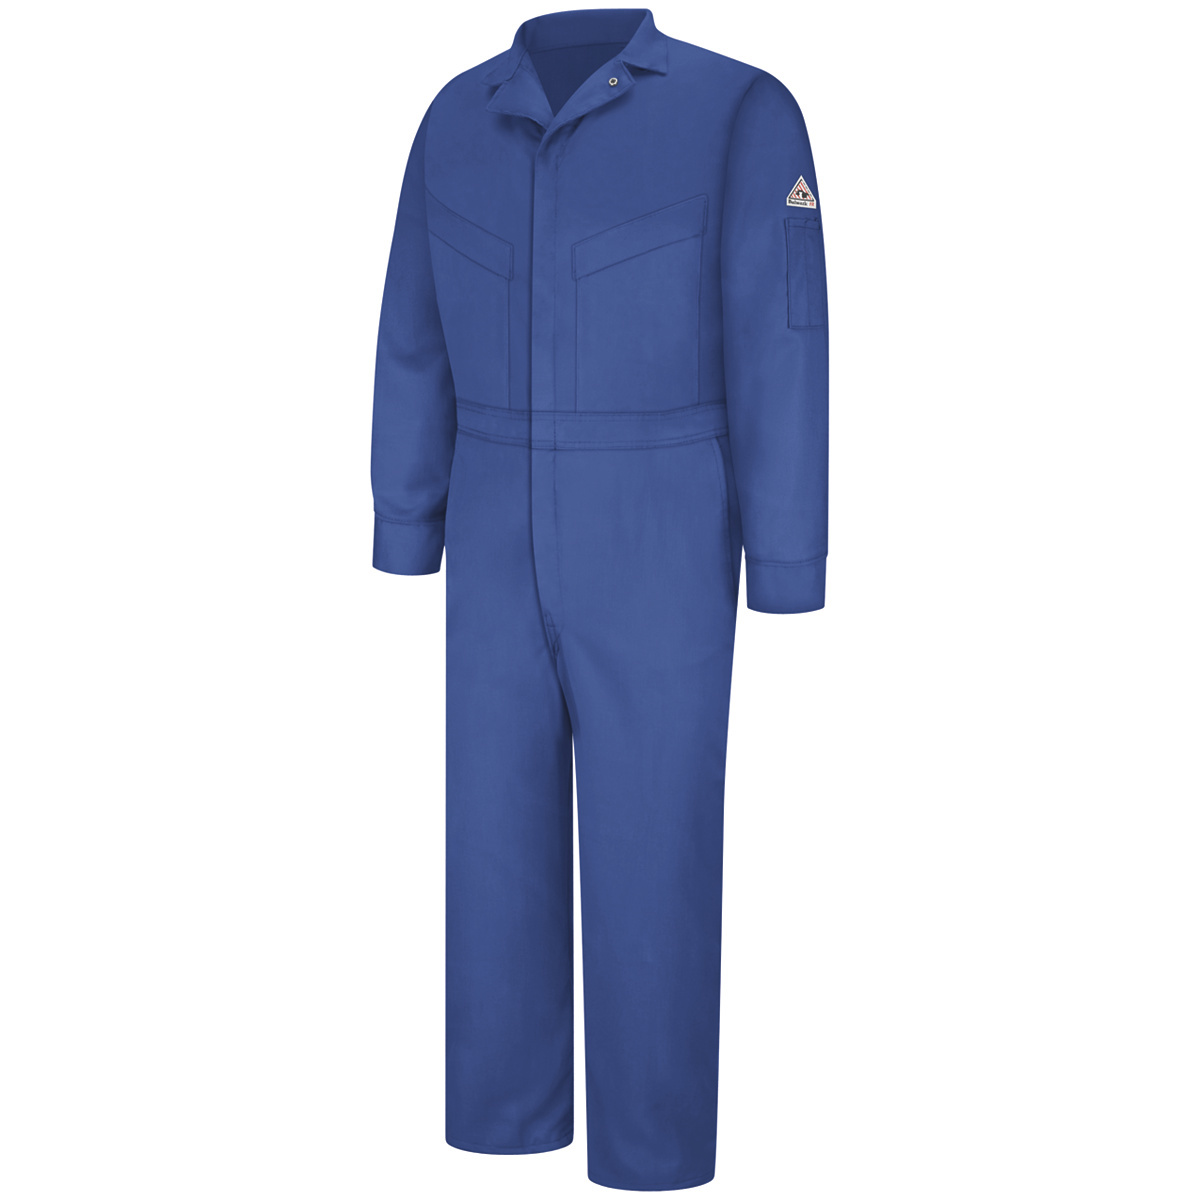 Bulwark® 58 Regular Royal Blue EXCEL FR® ComforTouch® Sateen/Cotton/Nylon Water Repellent Flame Resistant Coveralls With Zipper